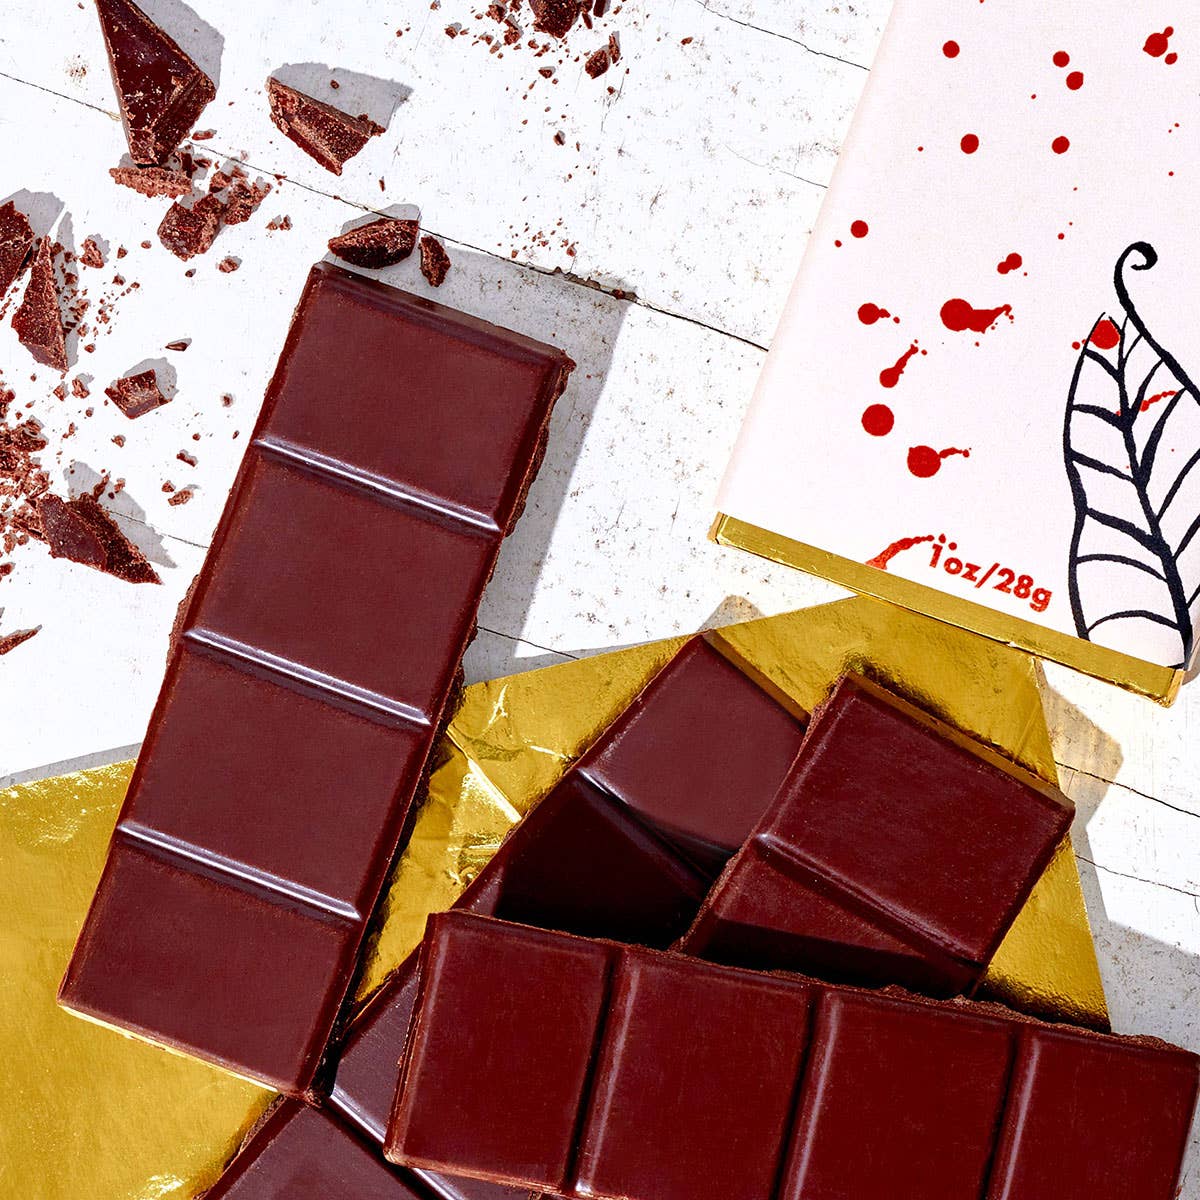 Madame Coco's  Bonnie Collection Chocolate Bars